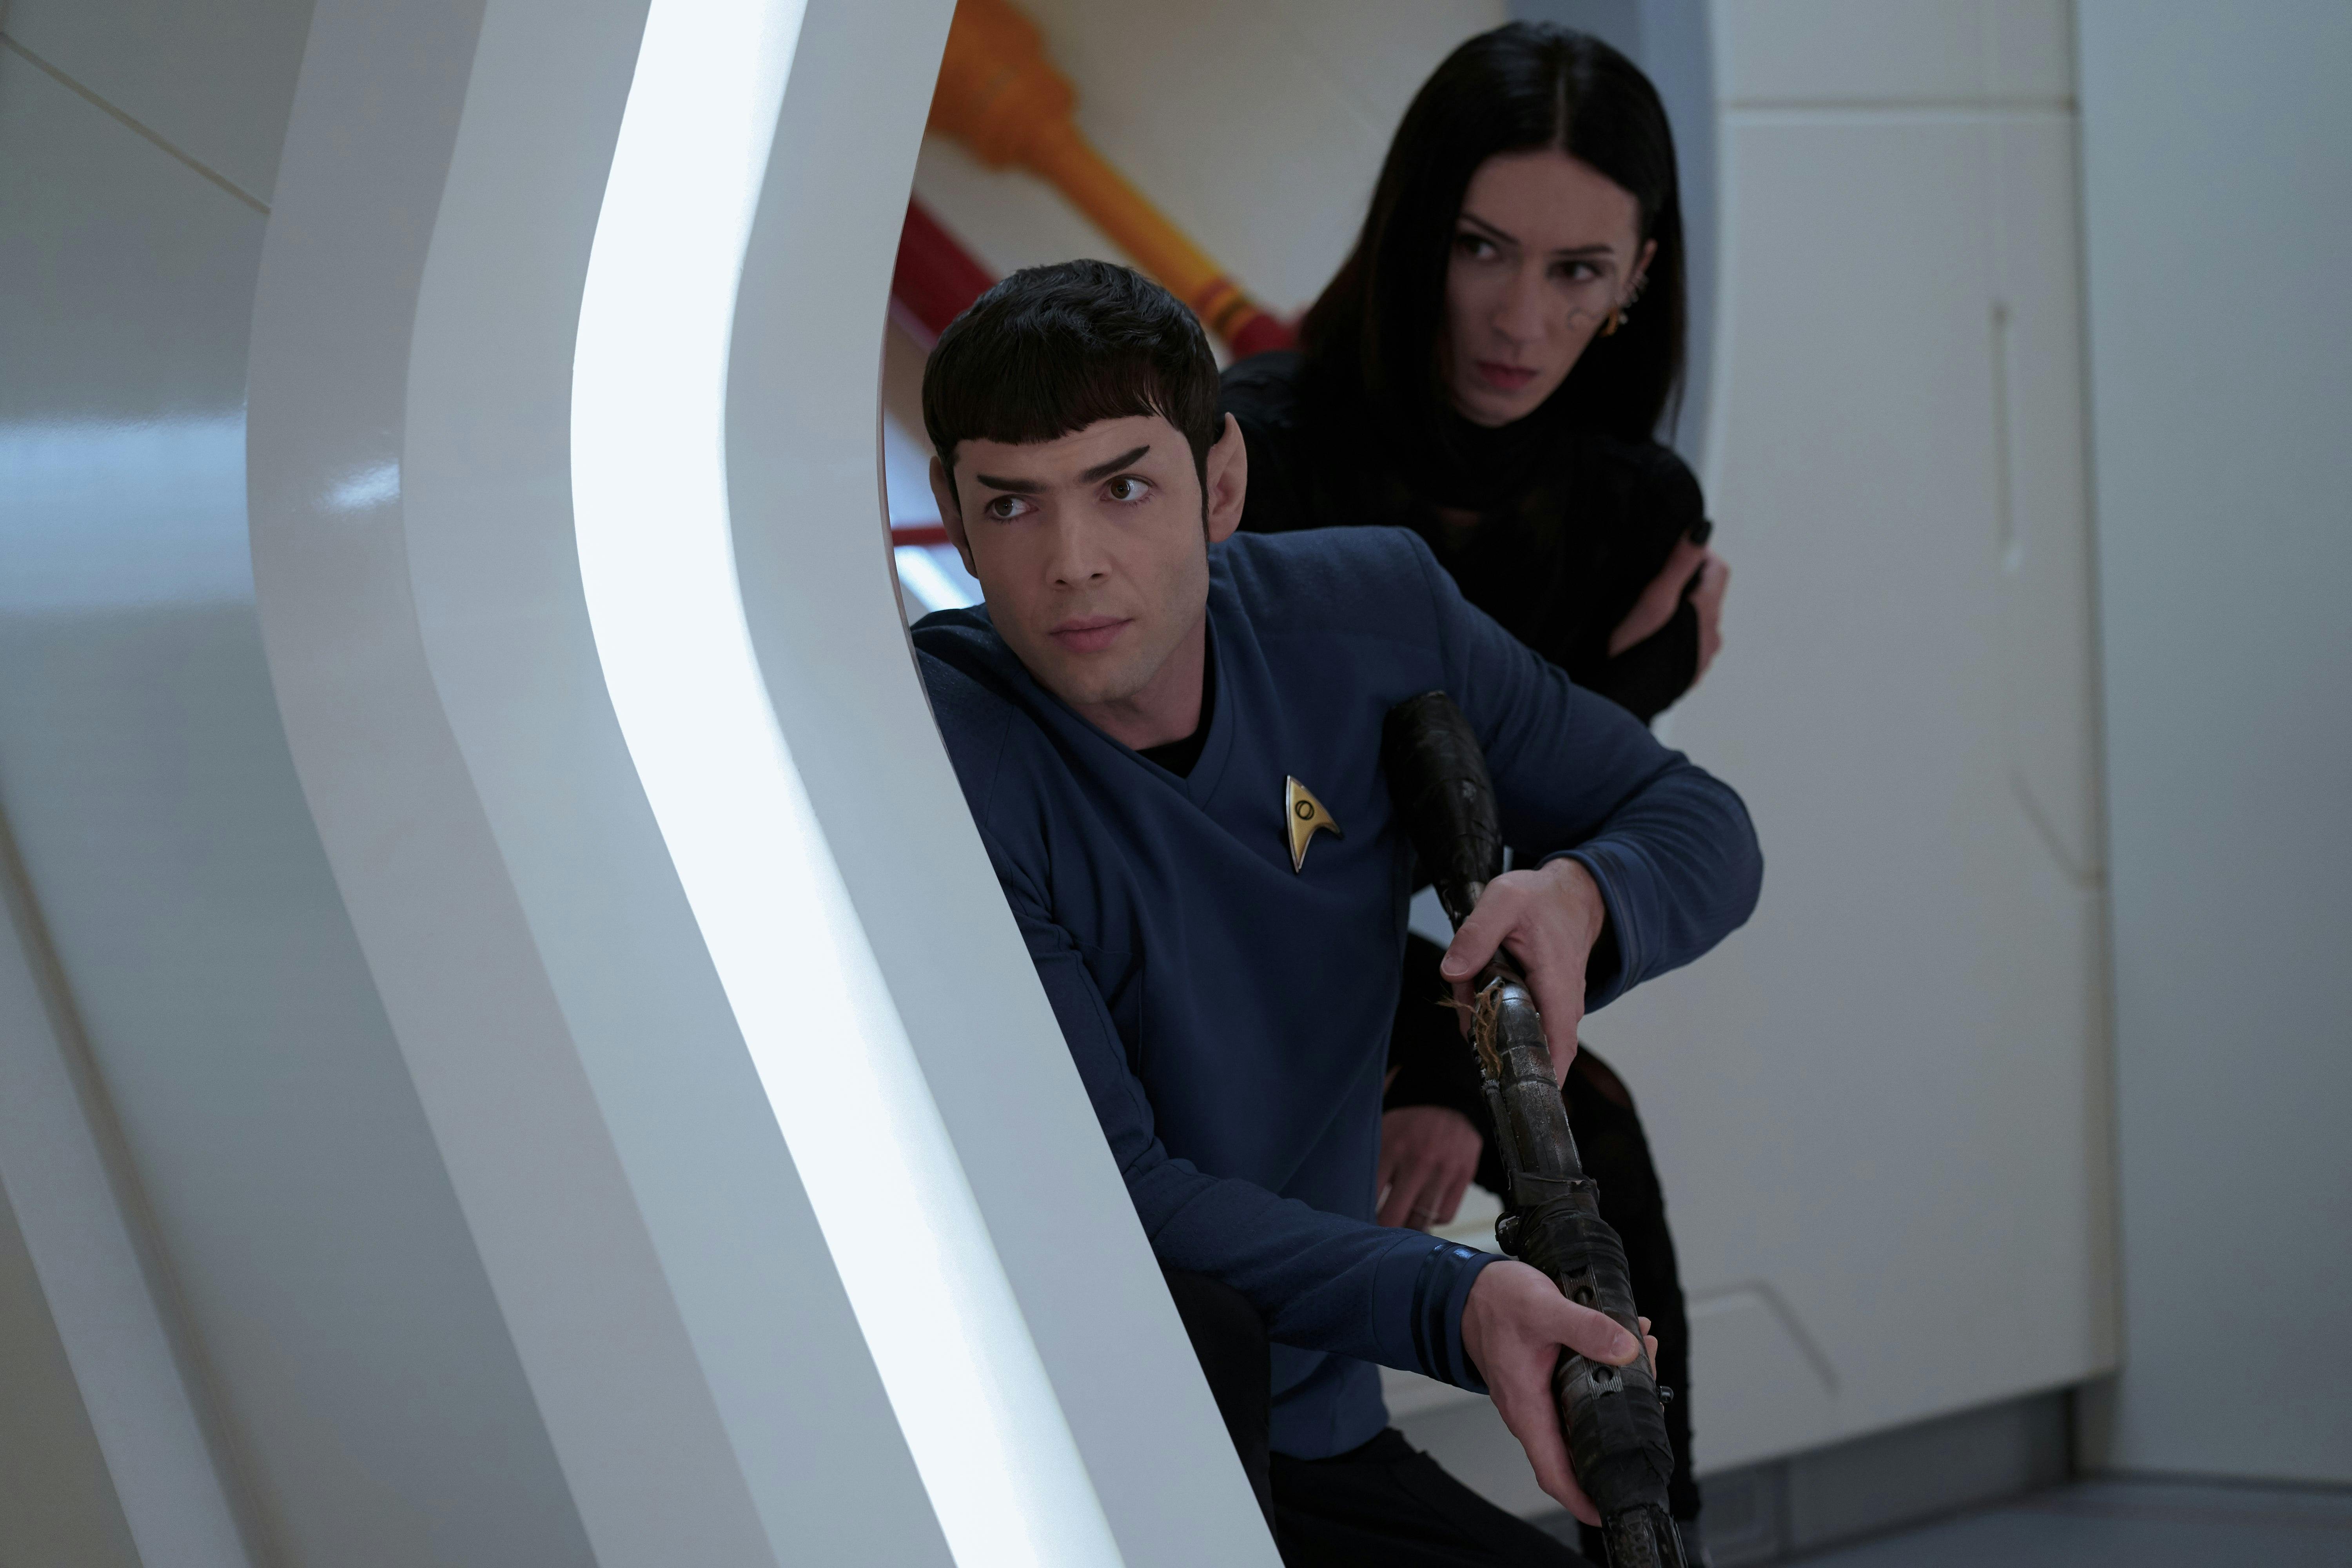 Spock (Strange New Worlds) is sheltered behind a door in the medbay, holding a phaser rifle at the ready. A woman with short black hair is behind him.